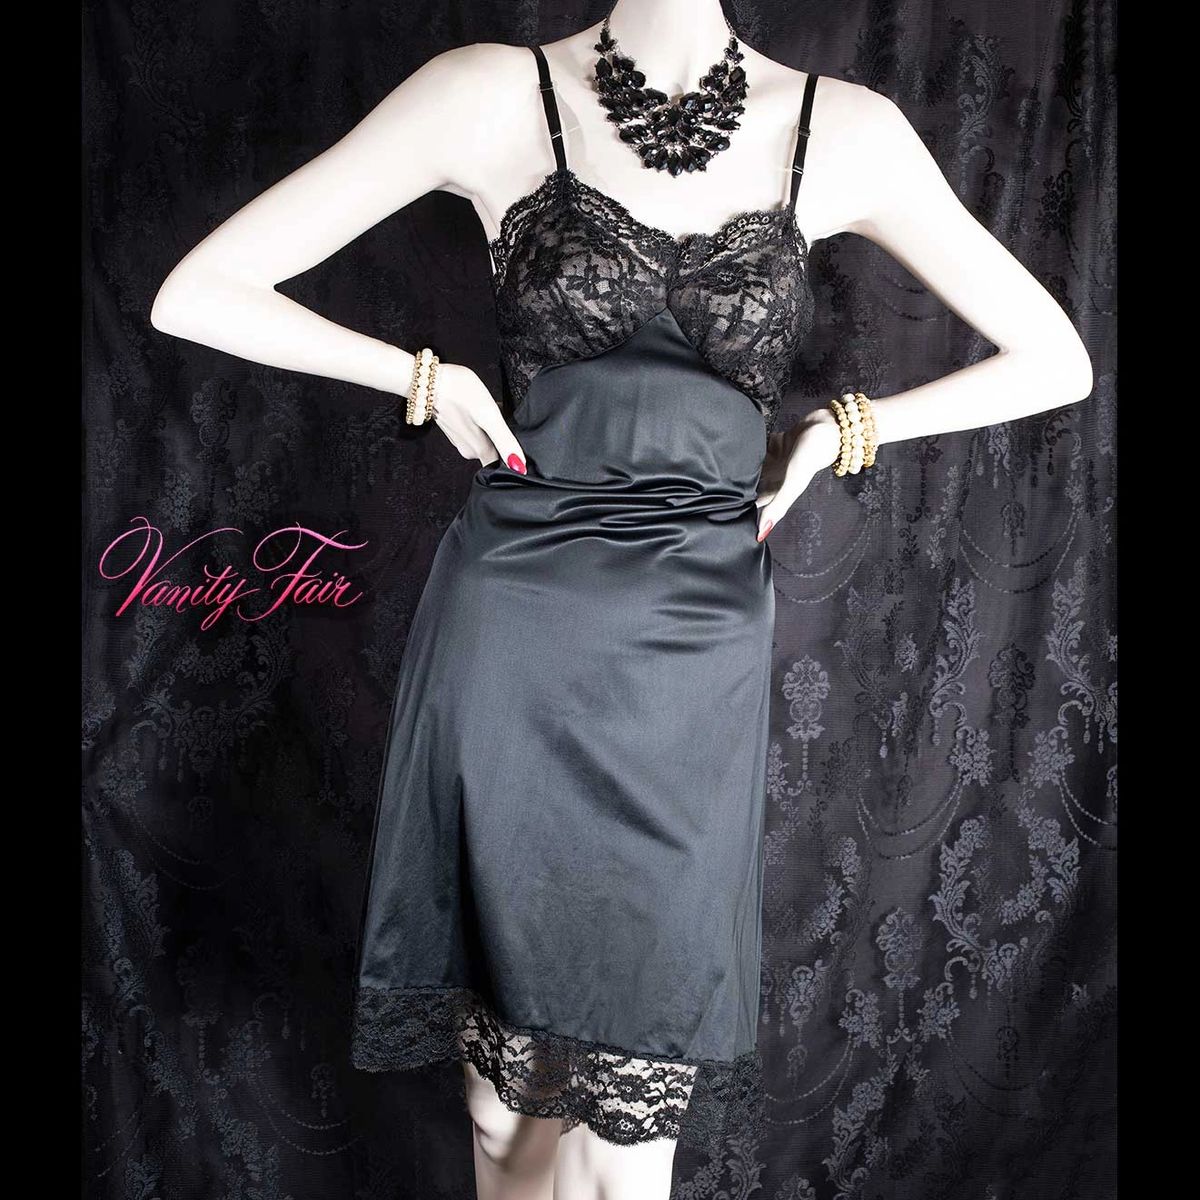 Desirable 'Vanity Fair' incredibly silky soft tactile glossy black tricot  nylon with luxurious matching floral net lace detail 1960's vintage full  slip